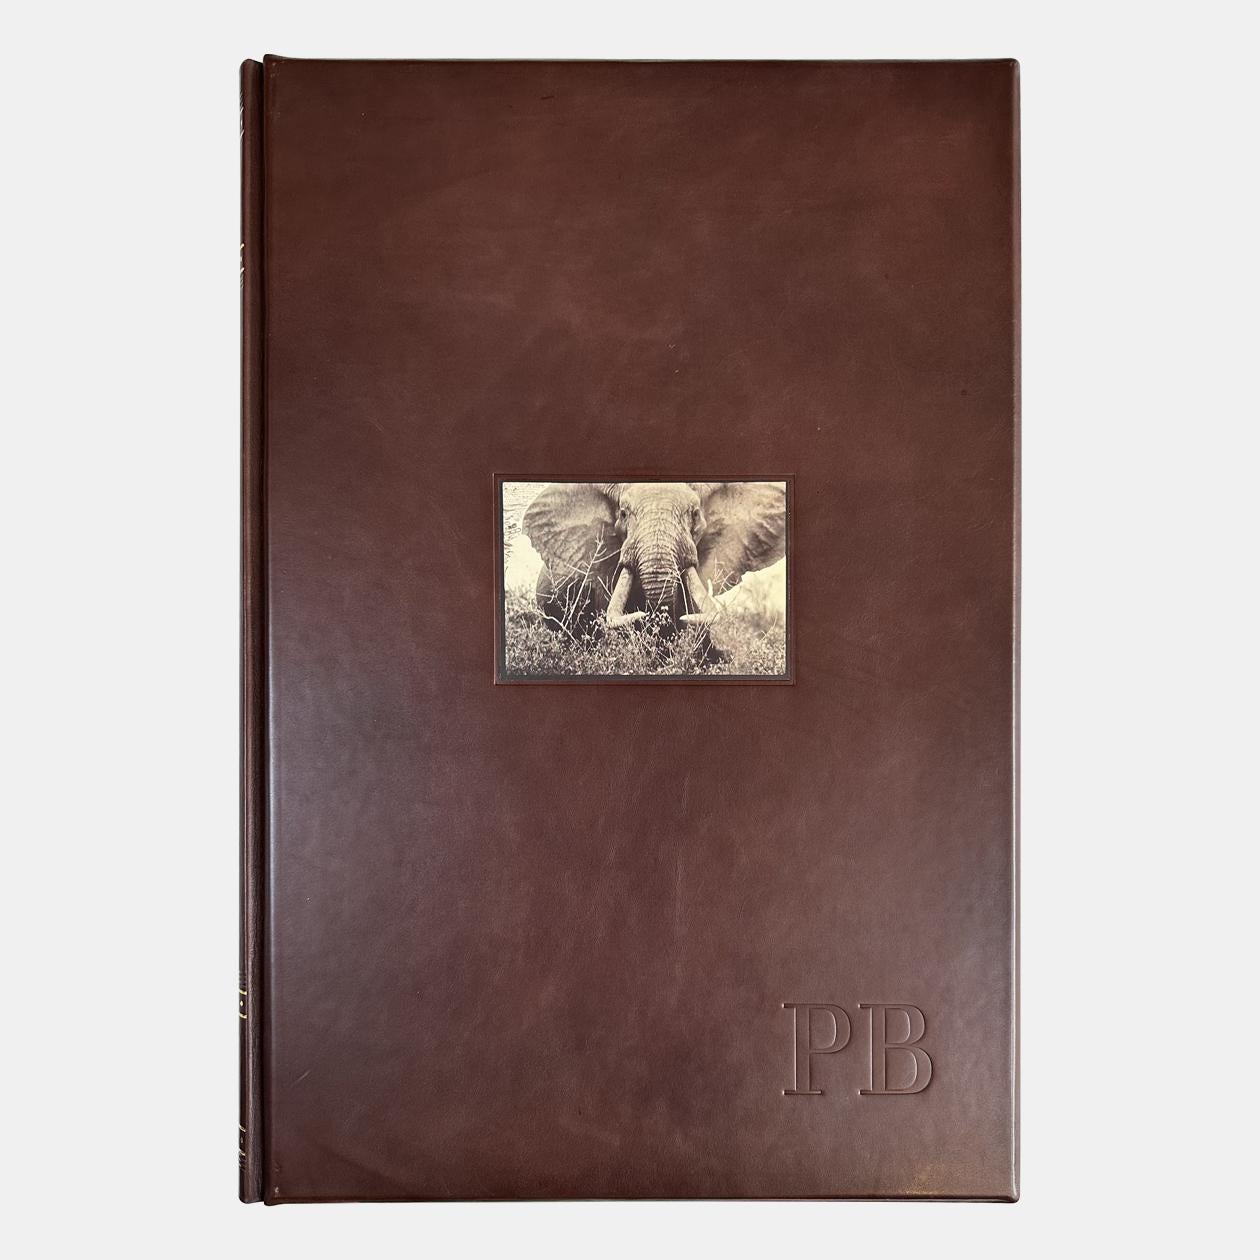 LOT:20230825S02
Peter Beard 
[Peter Beard,  Collector's Edition "965 Elephants"]
Leather-bound hardcover; gelatin-silver print photograph; velvet-lined wood shipping crate
Hardcover: Artist signed and numbered 0158 on the page (Edition 158 of